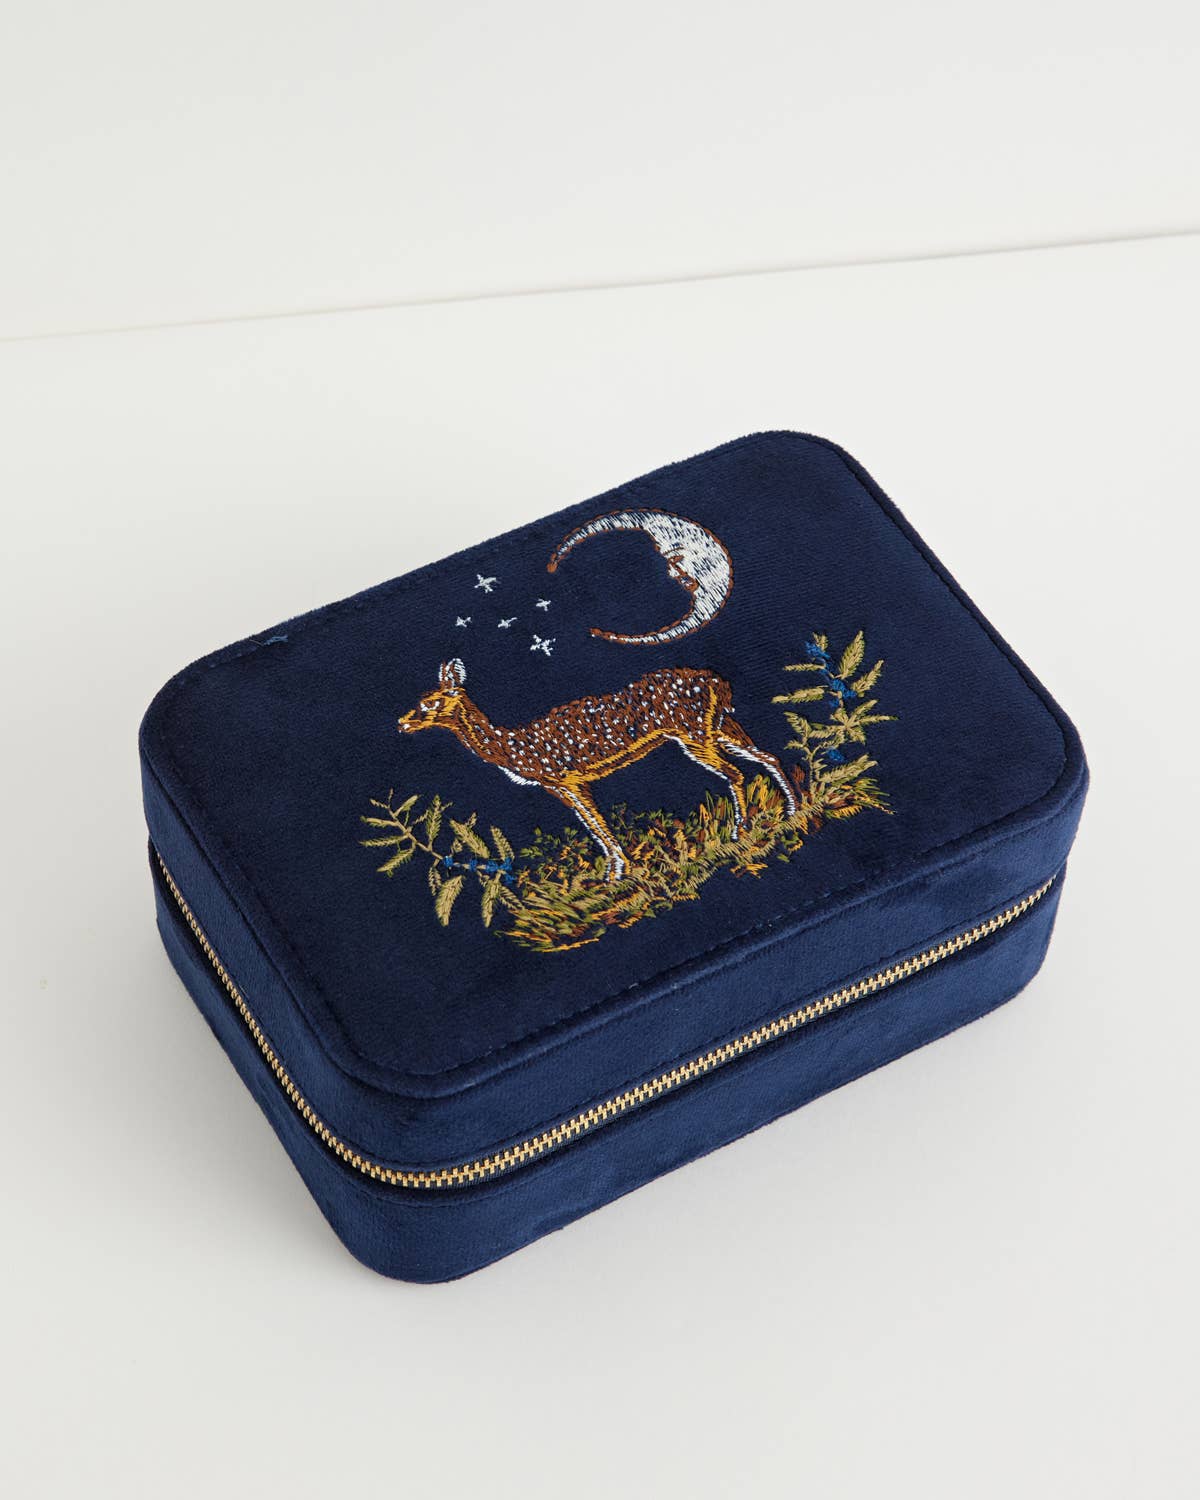 Deer and Moon Jewellery Box - Out of the Blue